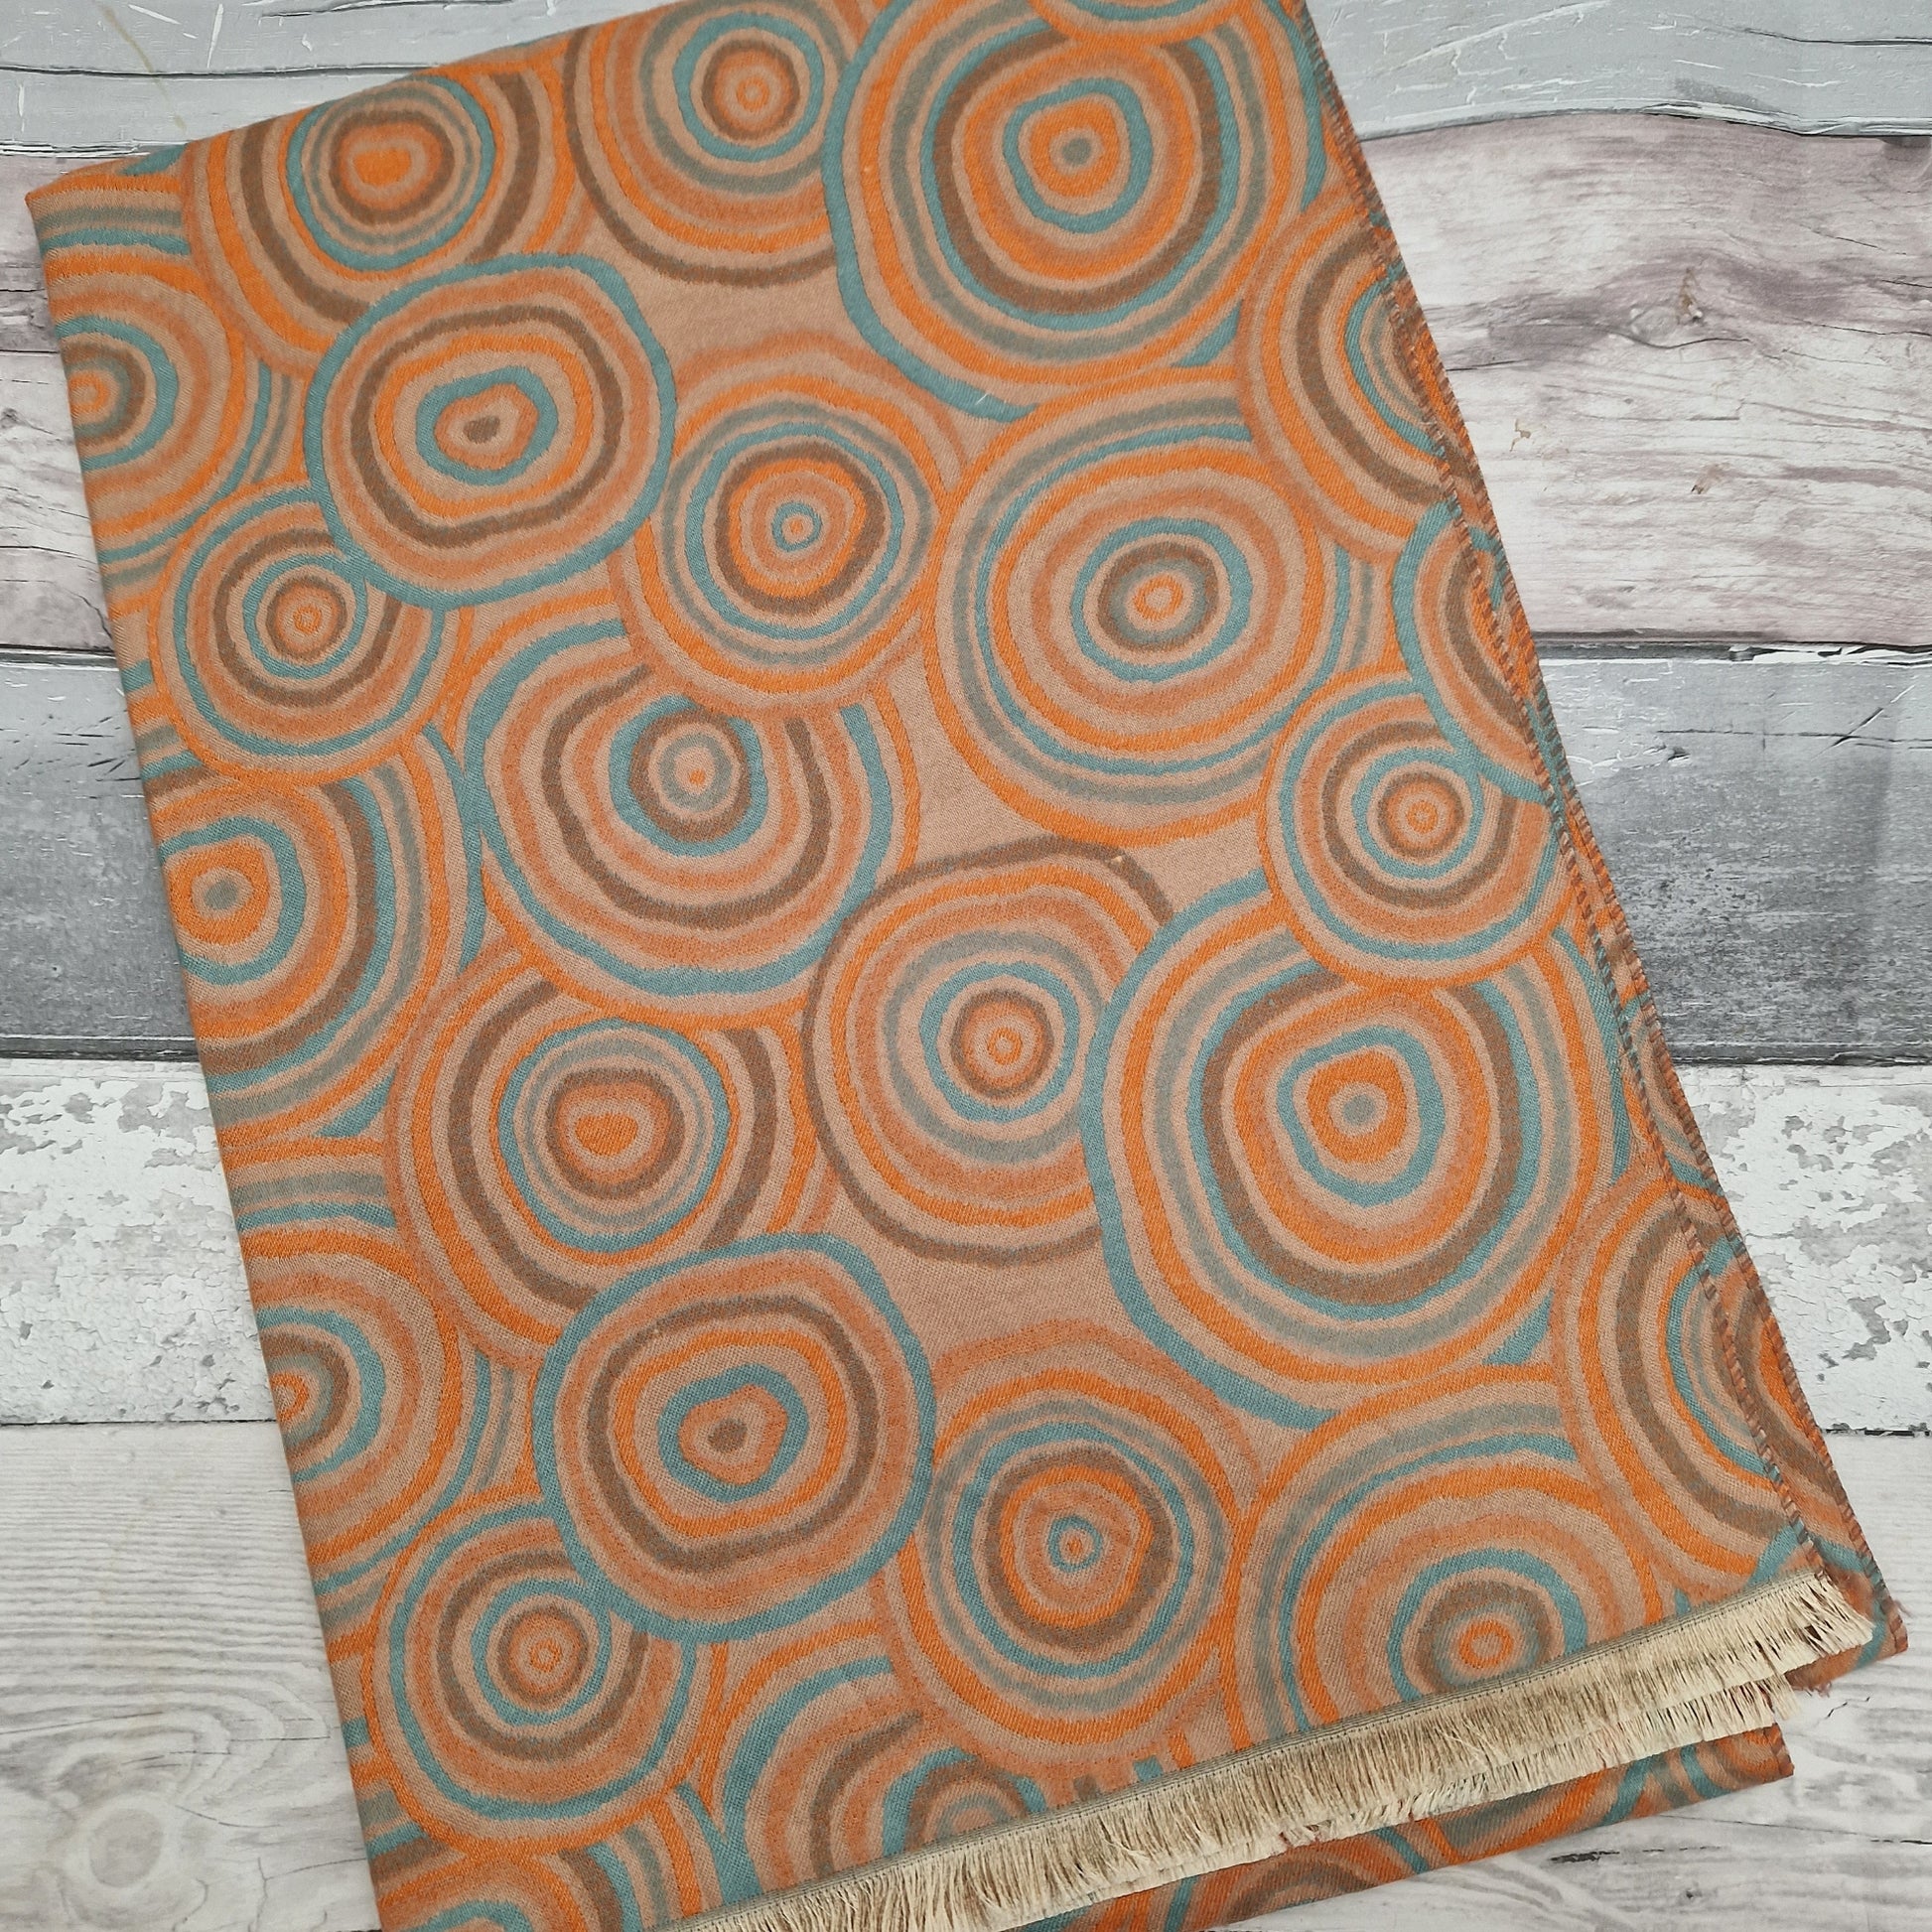 Wool mix scarf decorated with circles in shades of orange, brown and turquoise.